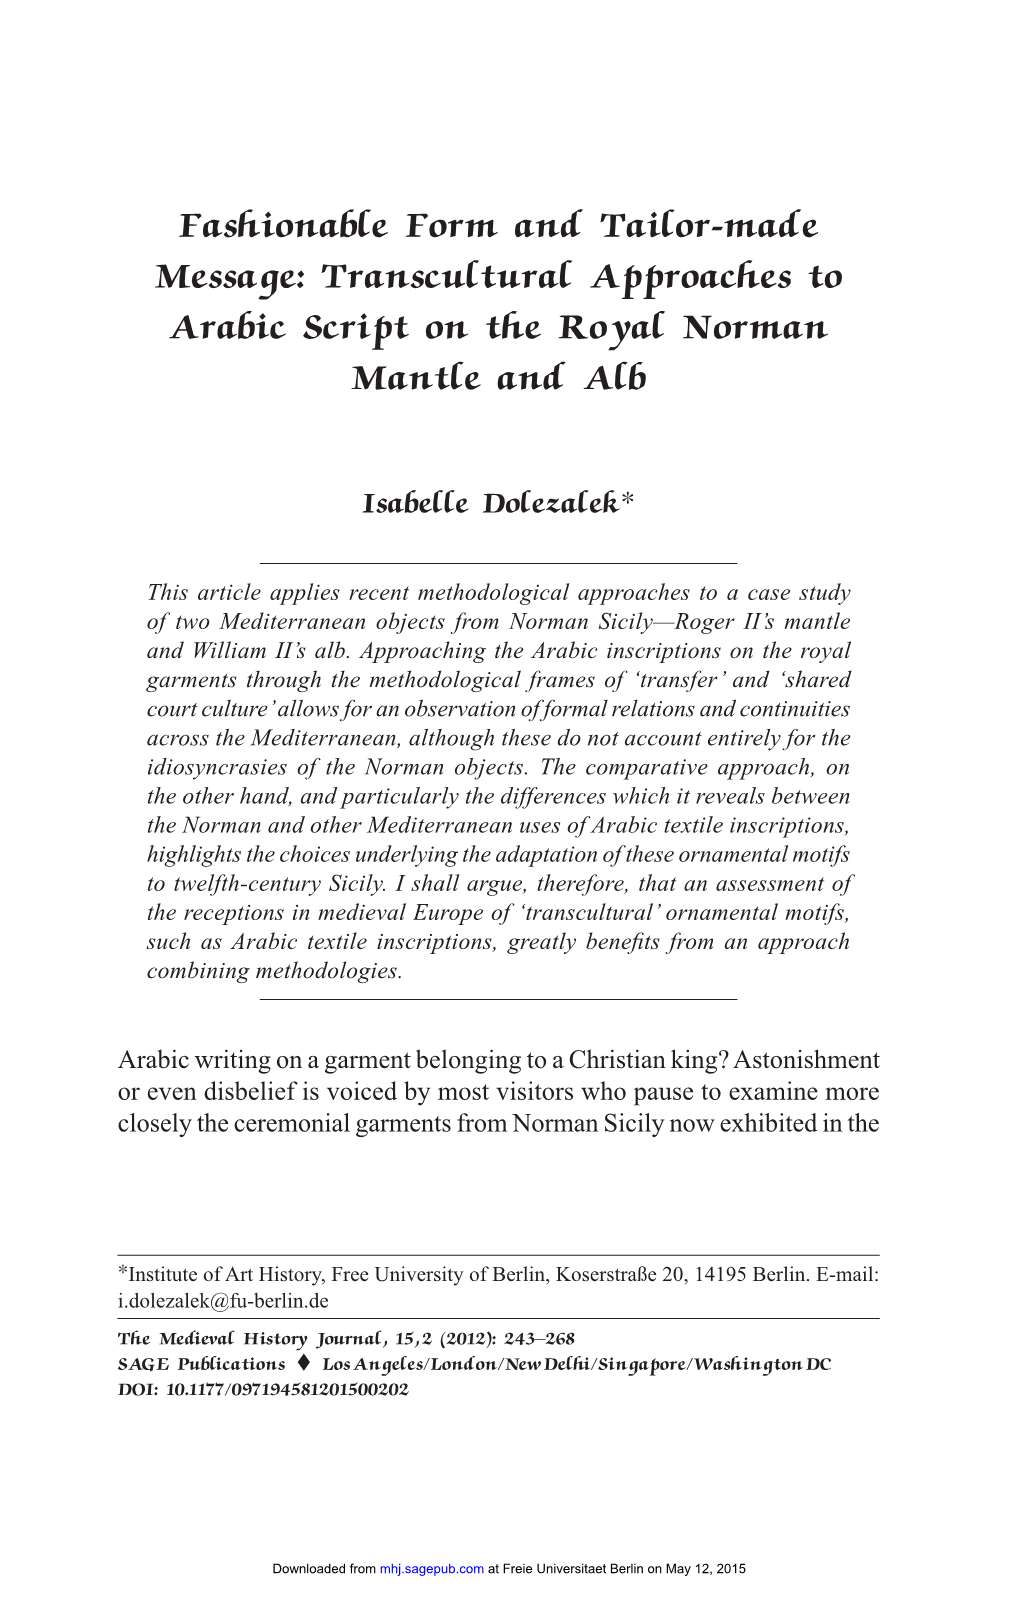 Transcultural Approaches to Arabic Script on the Royal Norman Mantle and Alb